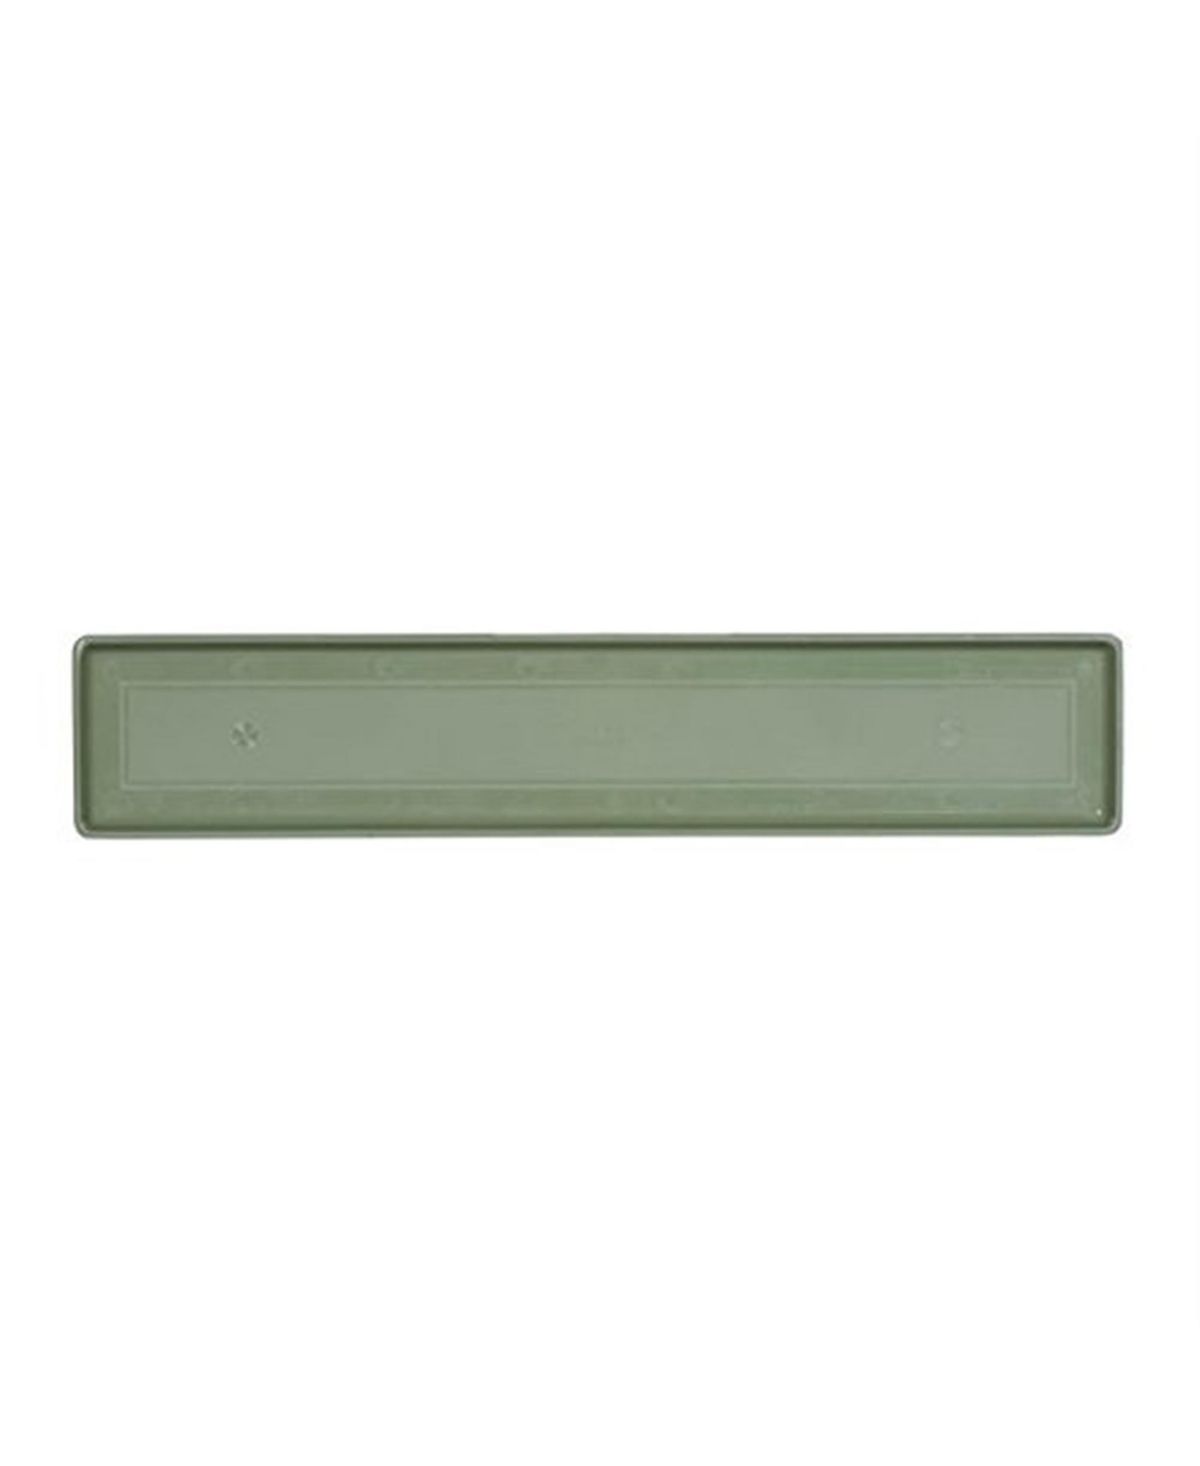 Countryside Plastic Flower Box Tray Sage, 36in - Sage